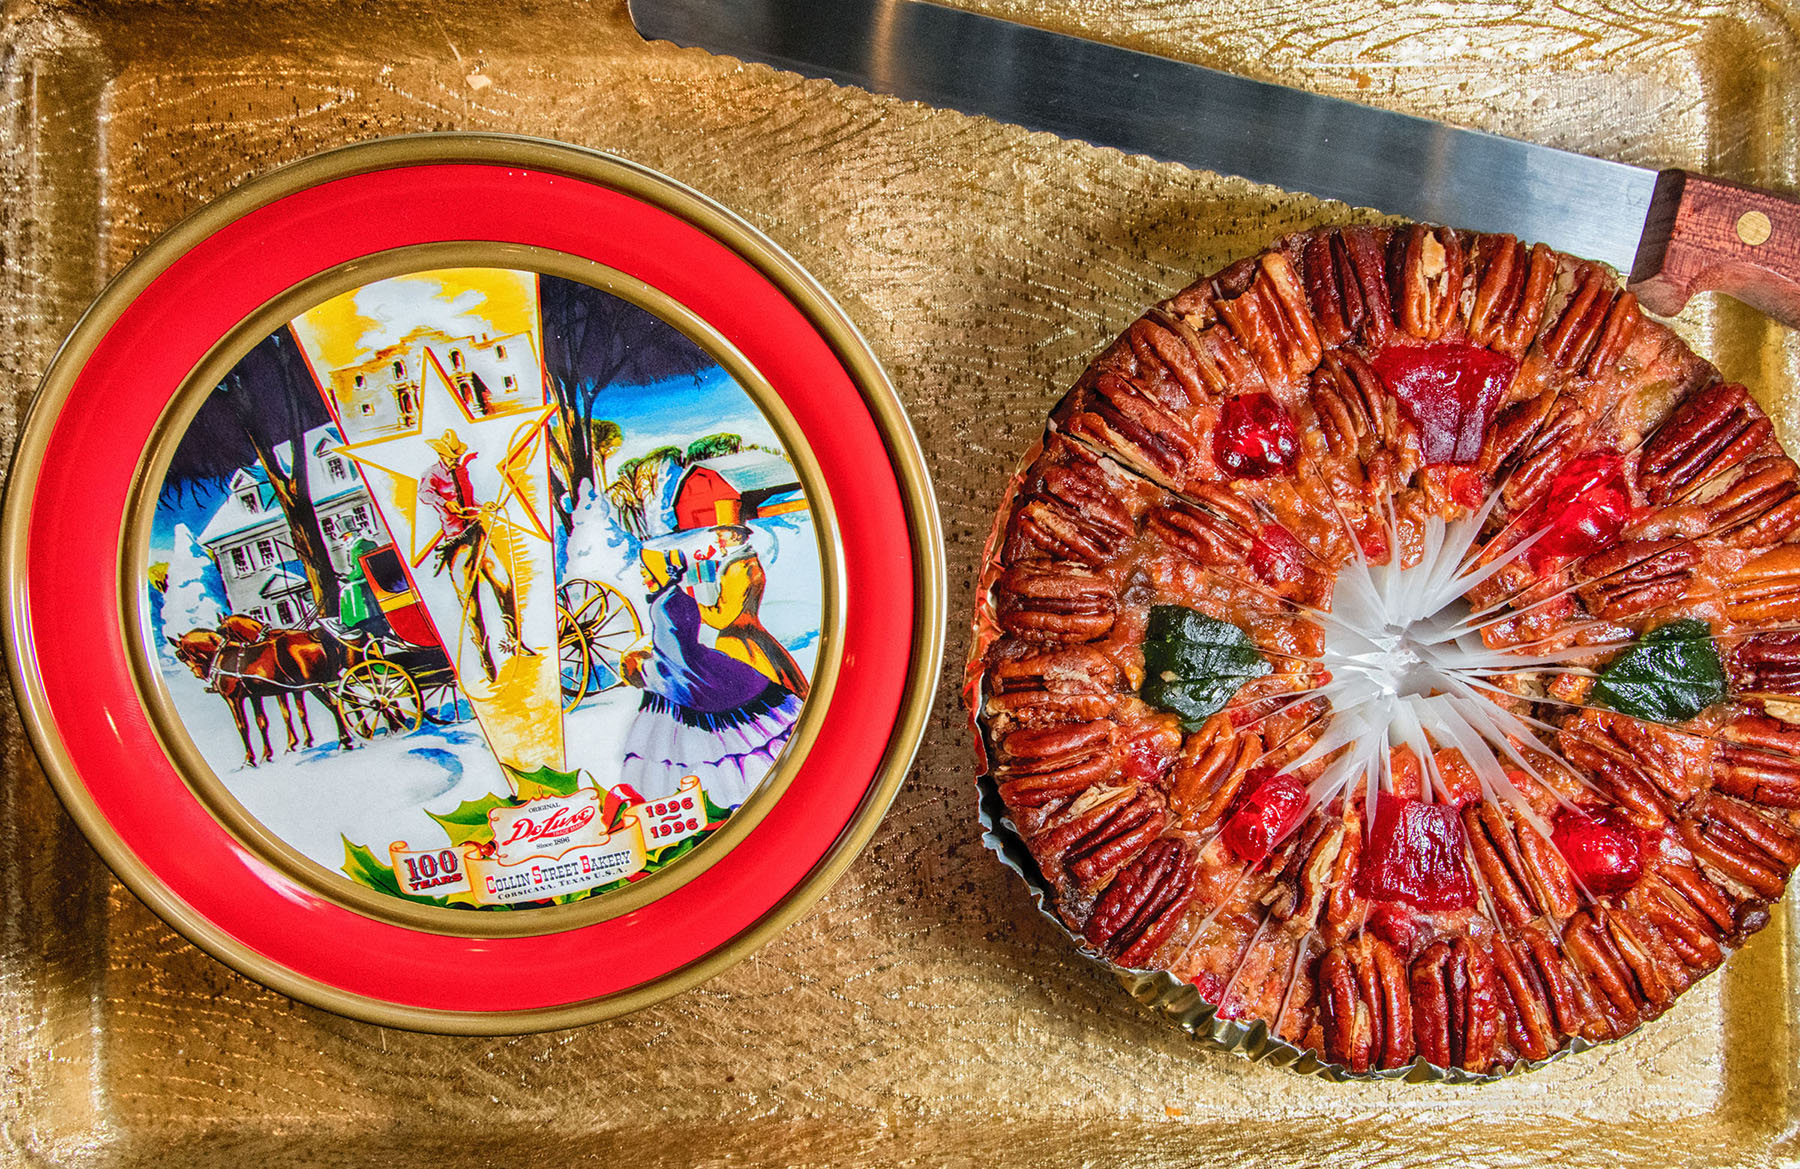 A fruit cake sitting next to a decorative tin on a wood countertoop